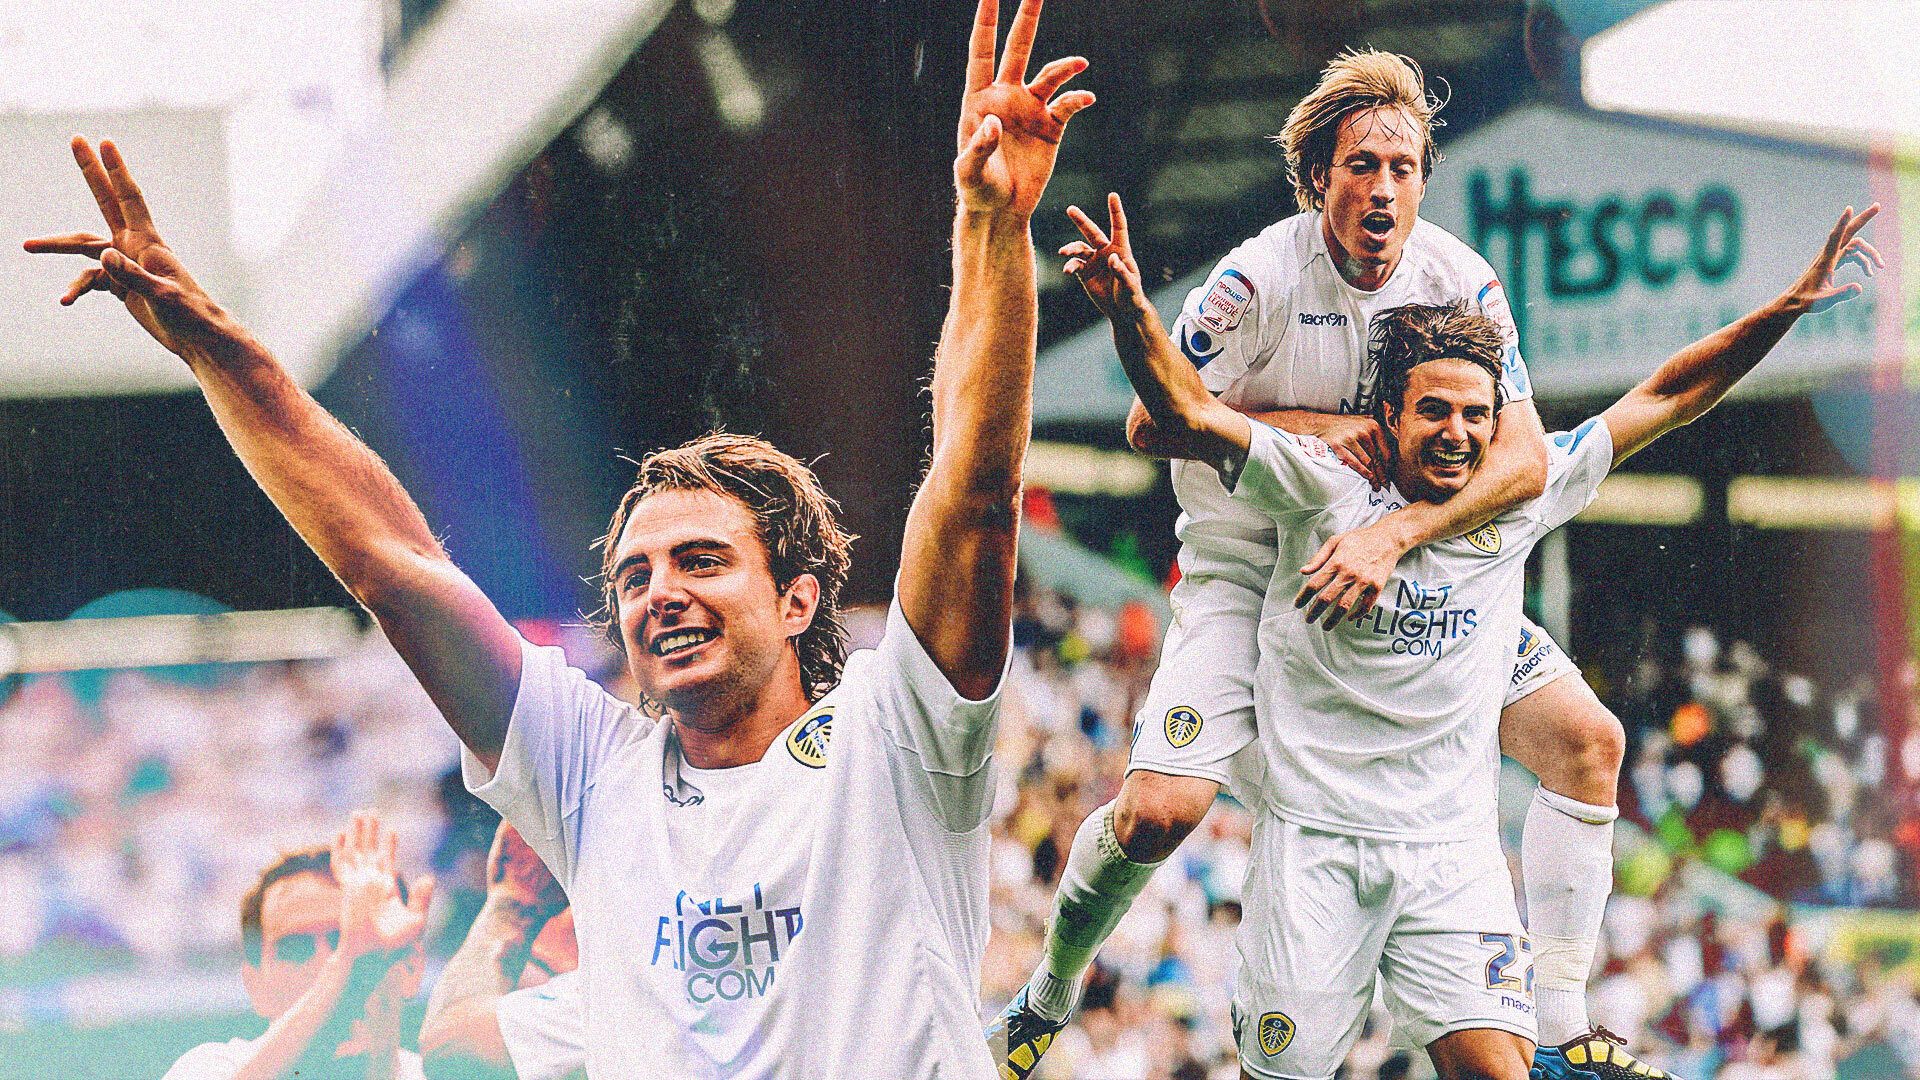 Two photos side by side of David Somma celebrating scoring for Leeds, with his arm in the air on the left, and with Luciano Becchio on his back on the right. Somma looks sickeningly handsome